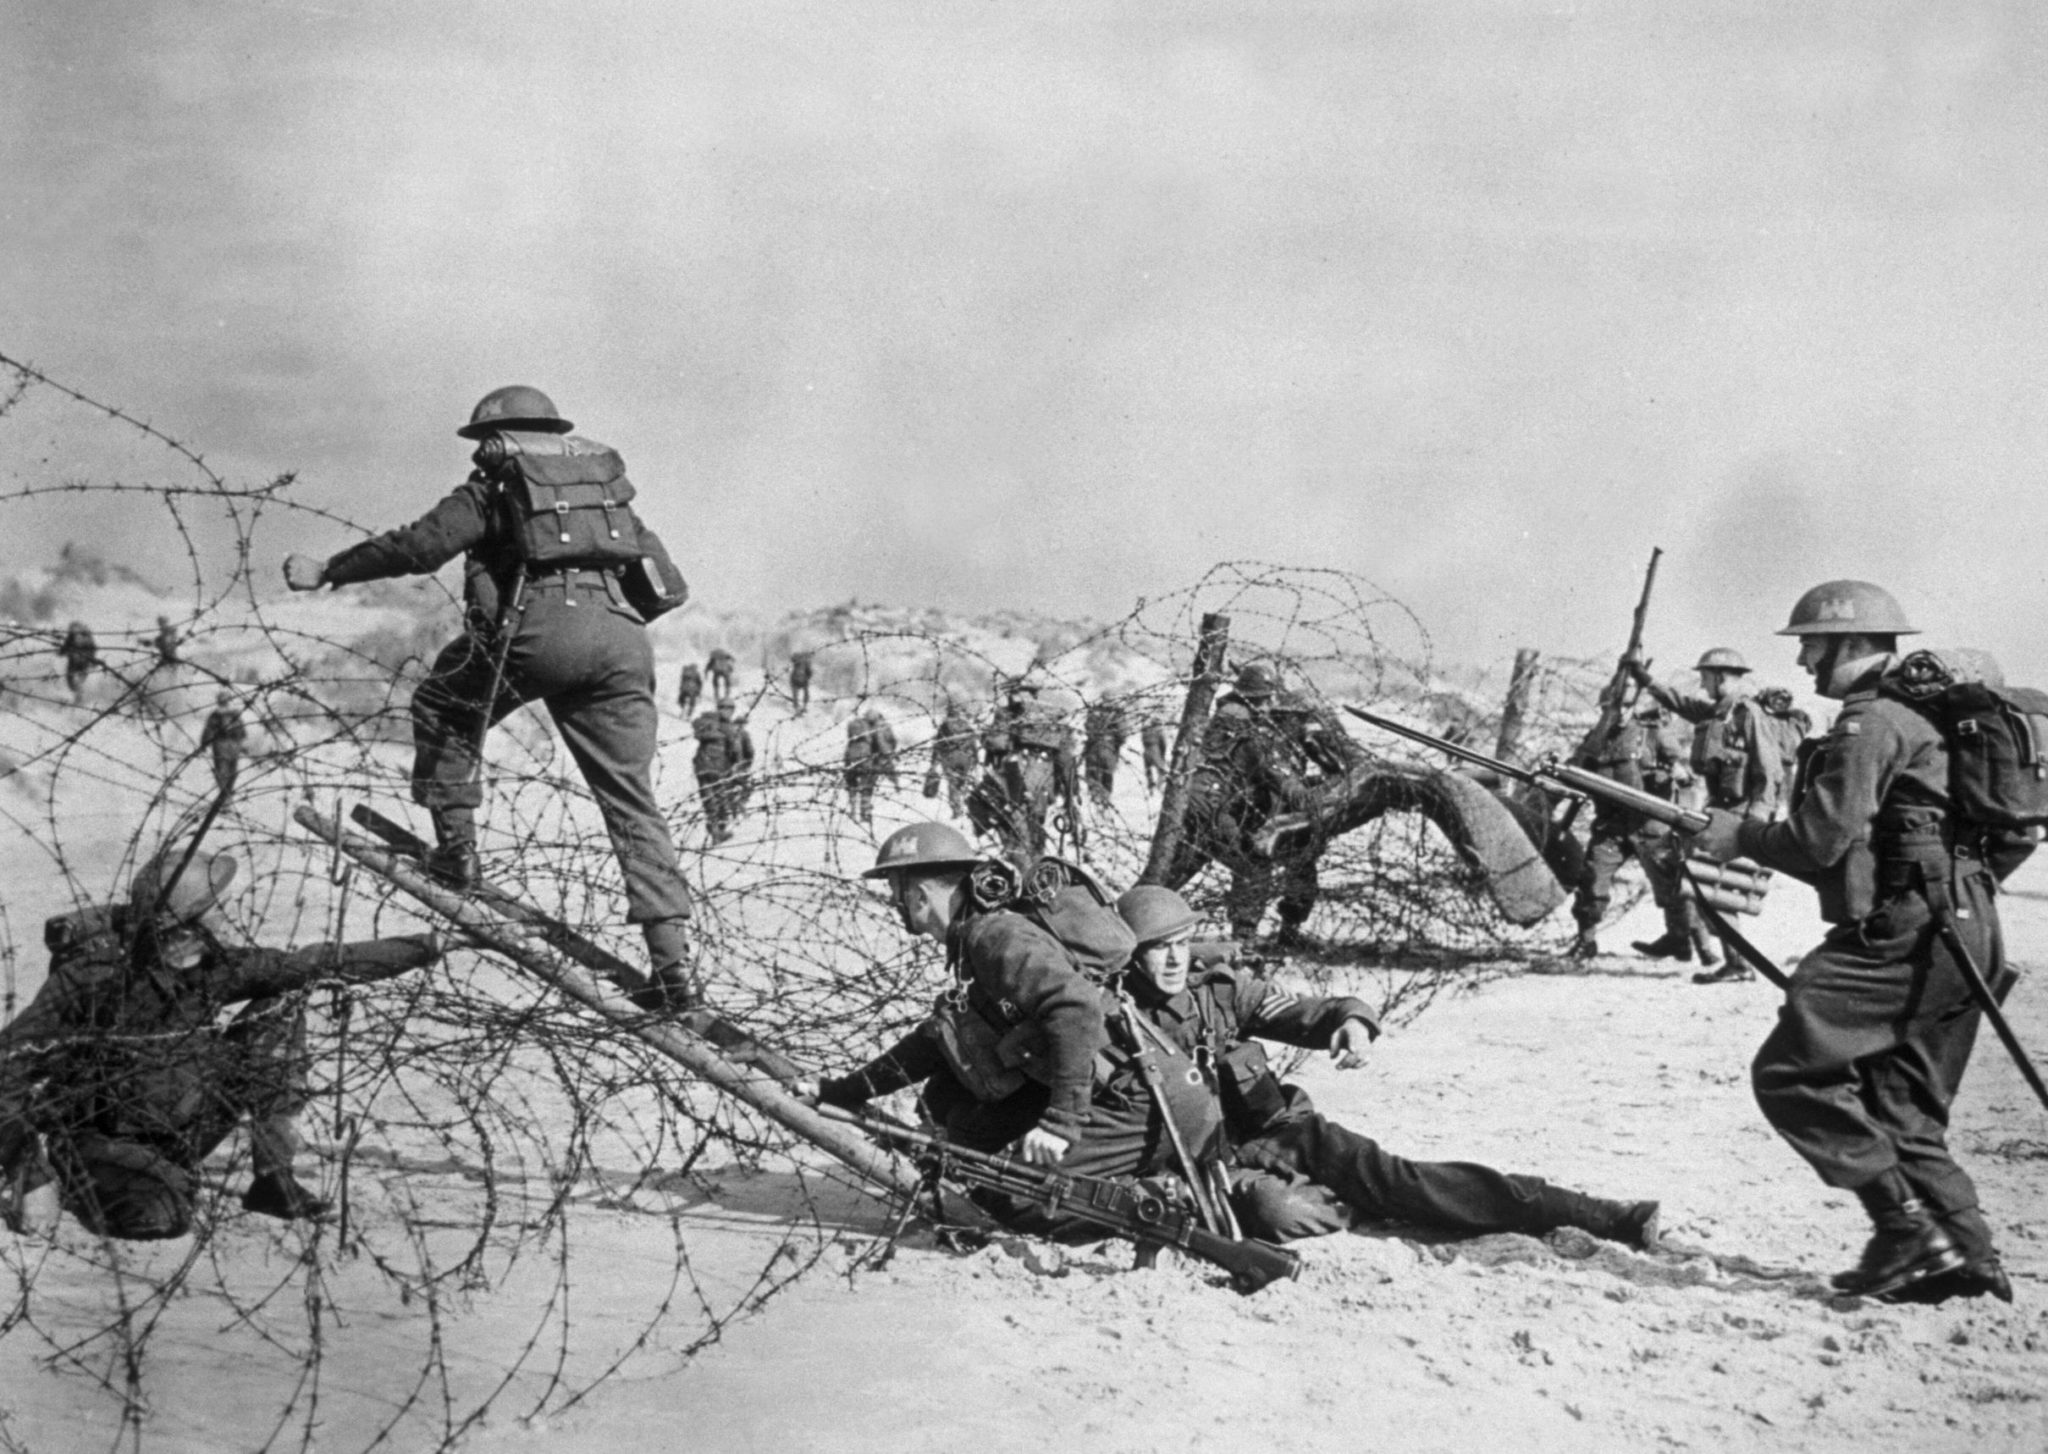 1940:  British soldiers negotiating a barbed wire defence during a seashore invasion exercise.  (Photo by Hulton Archive/Getty Images)